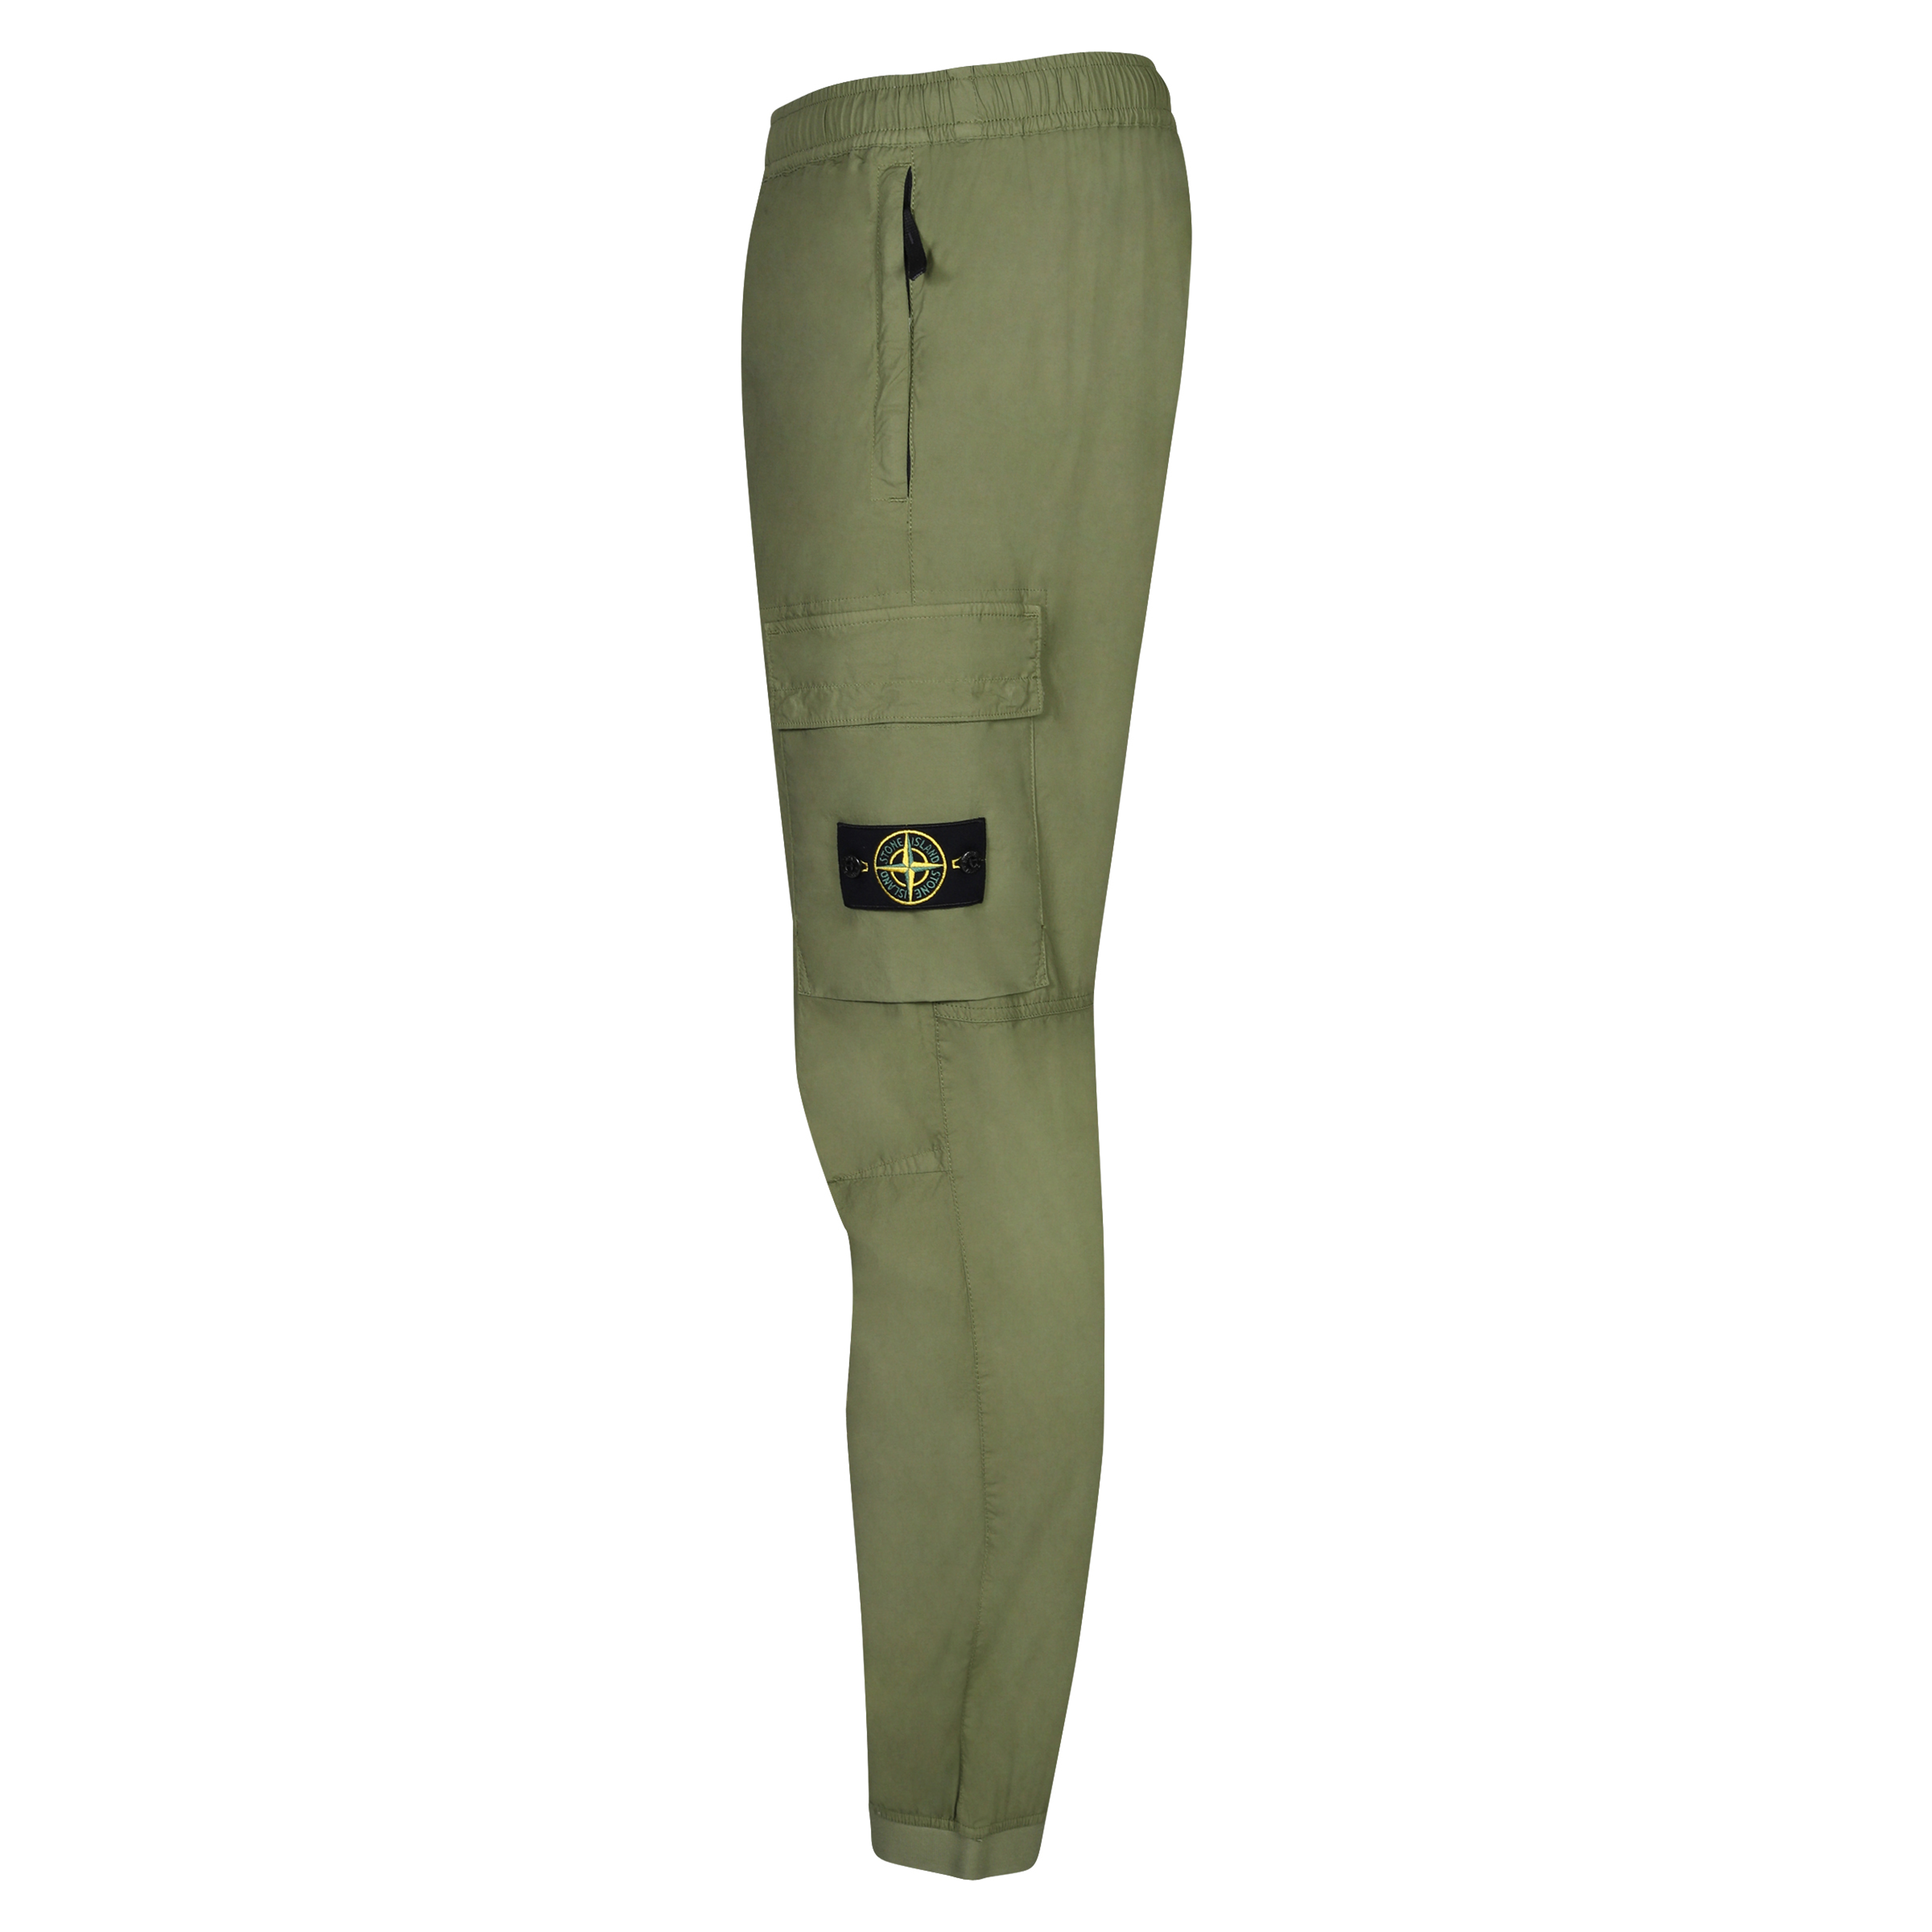 Stone Island Light Cargo Pant in Olive 32